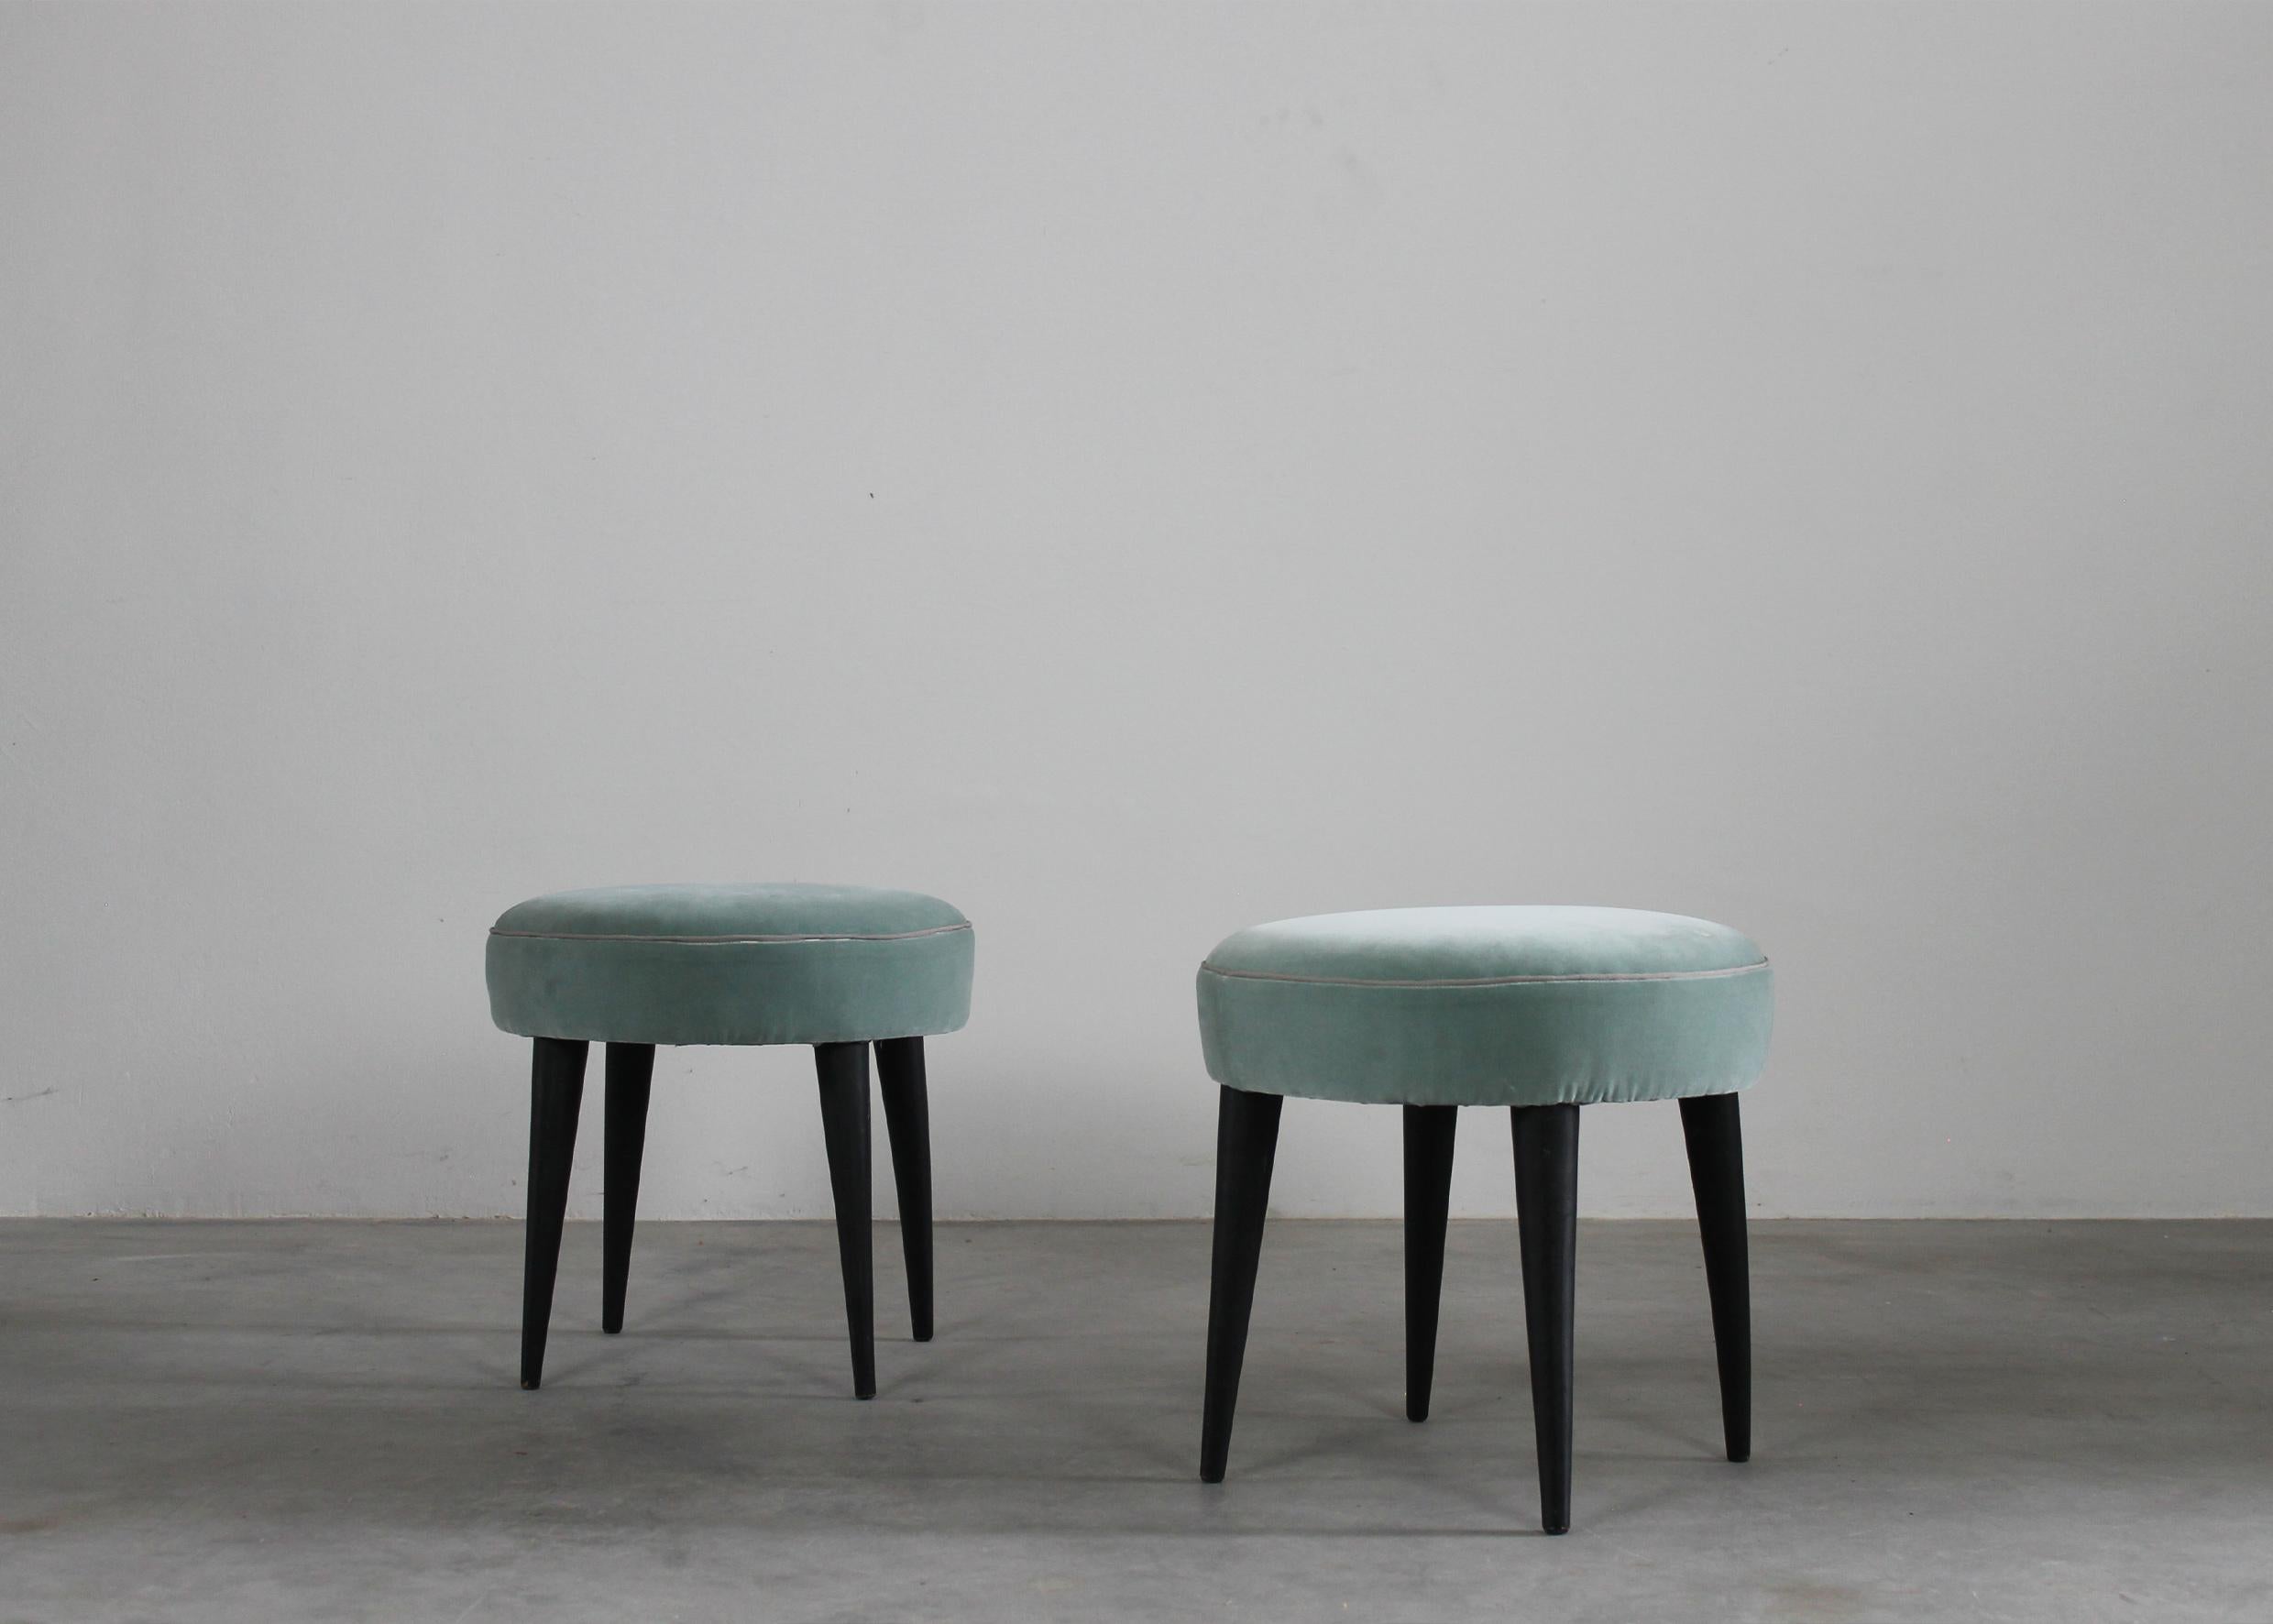 Set of two stools with legs in black lacquered wood and seats upholstered in light blue fabric. 

Attribuited to Gio Ponti, Italian Manufacture 1950s 

Gio Ponti was an icon of the modernist movement: the Italian designer, architect, artist and